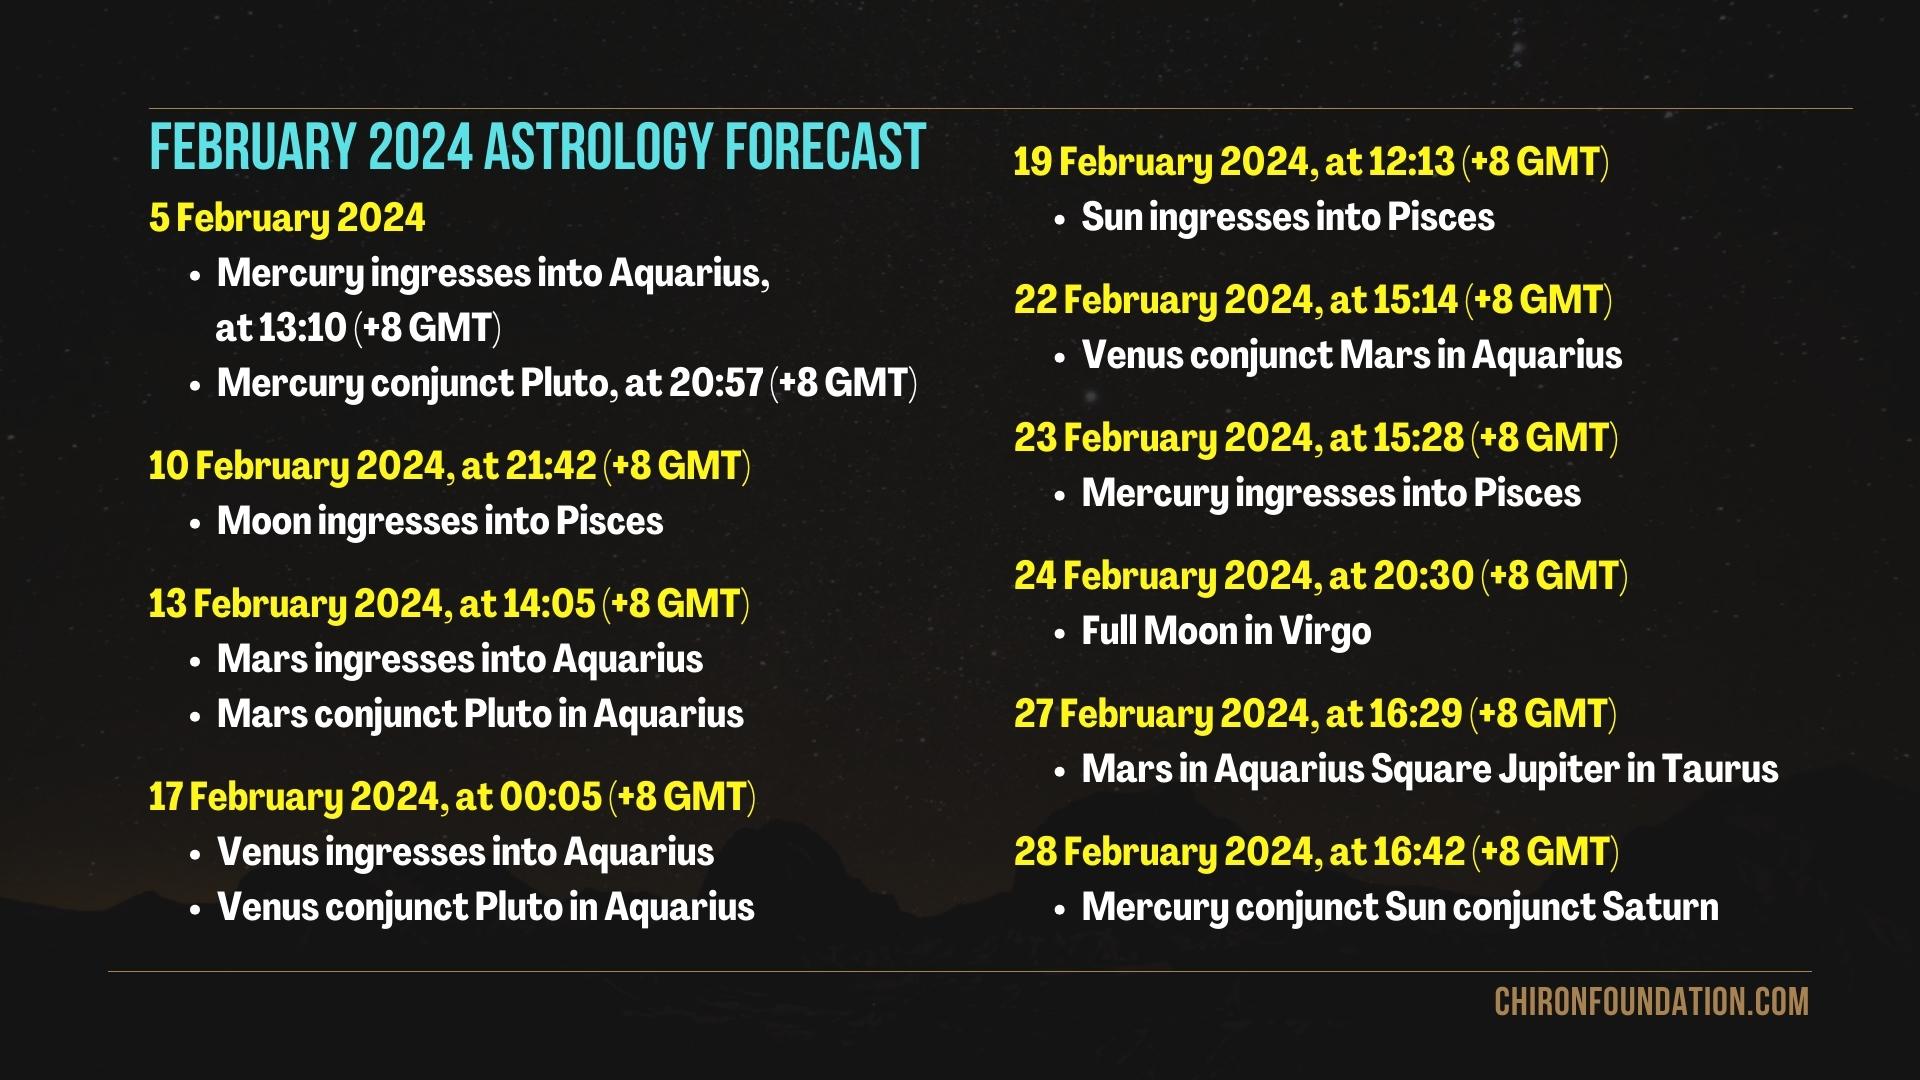 February 2024 Astrology Forecast - Planetary Placements